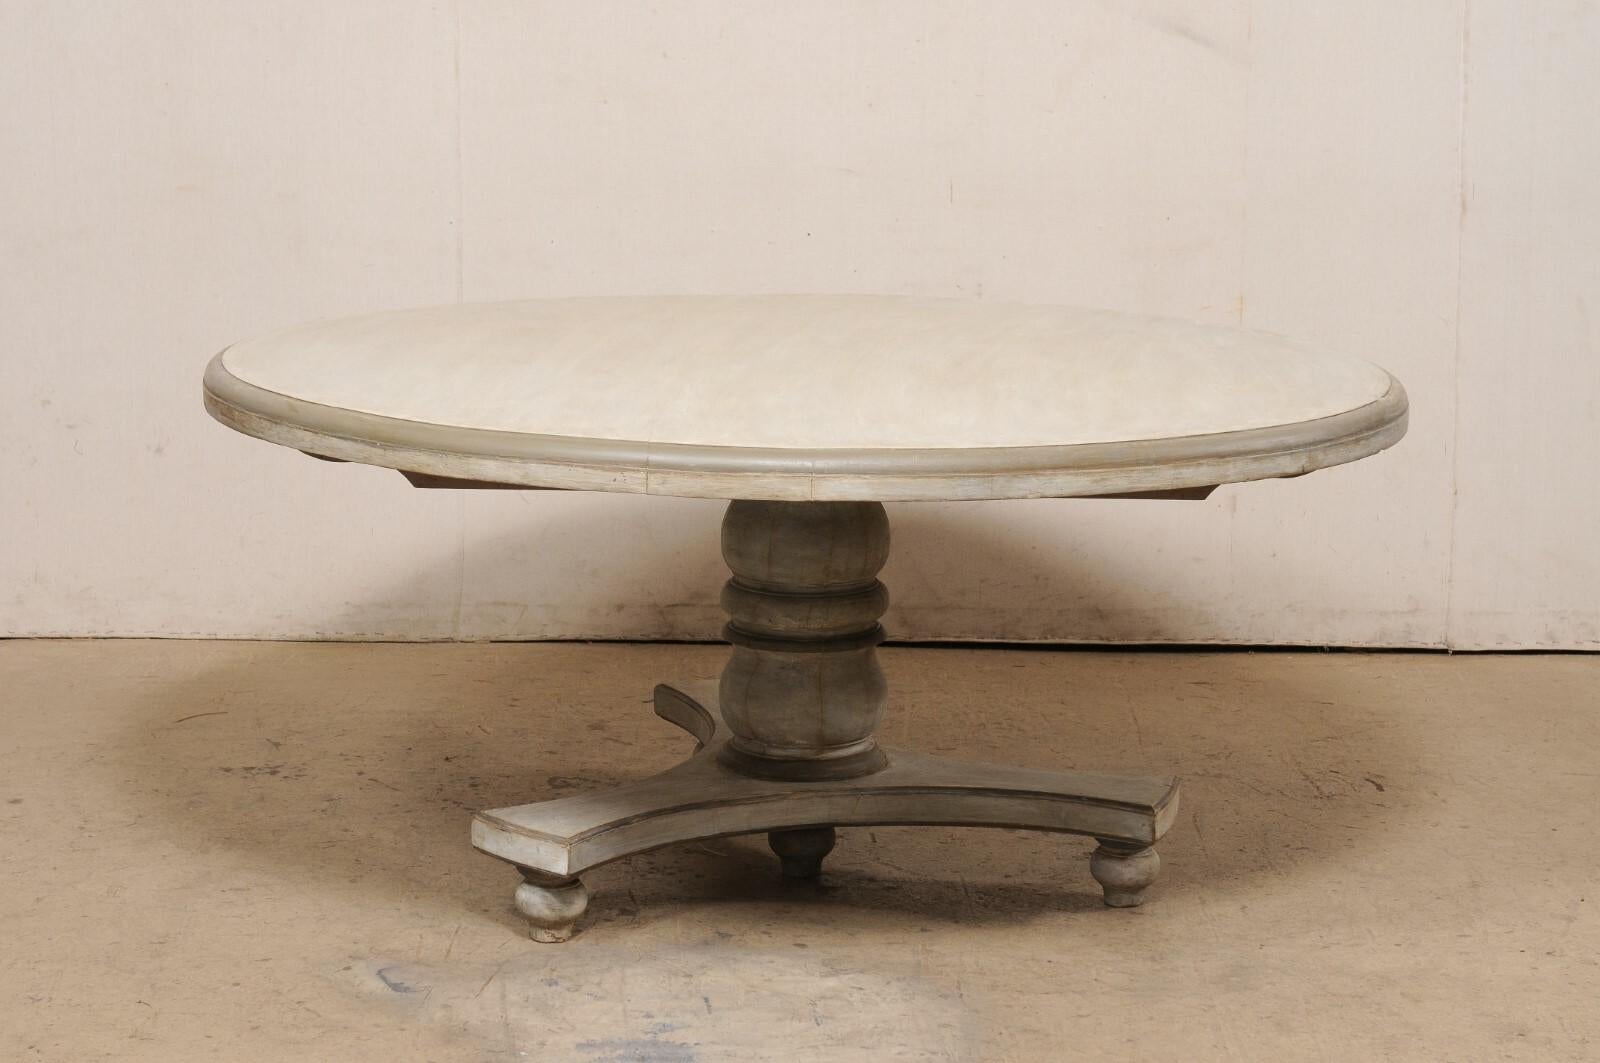 A vintage painted teak wood round pedestal dining table. This dining table from India features a round-shaped top (2.75